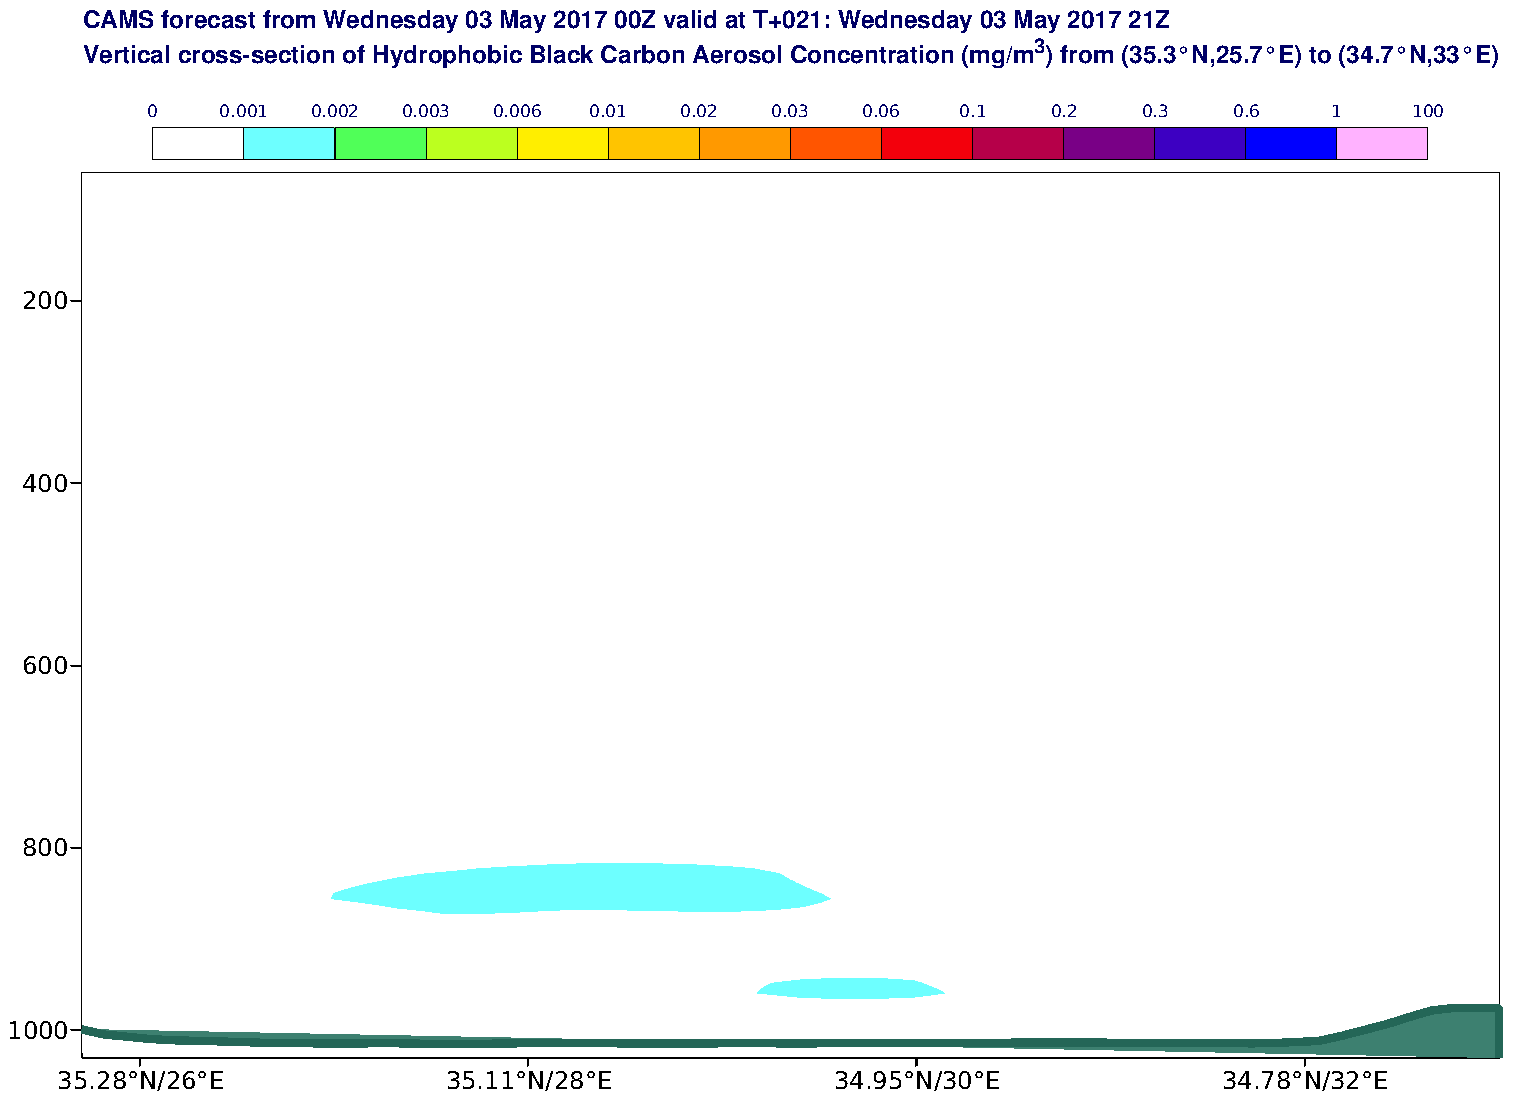 Vertical cross-section of Hydrophobic Black Carbon Aerosol Concentration (mg/m3) valid at T21 - 2017-05-03 21:00